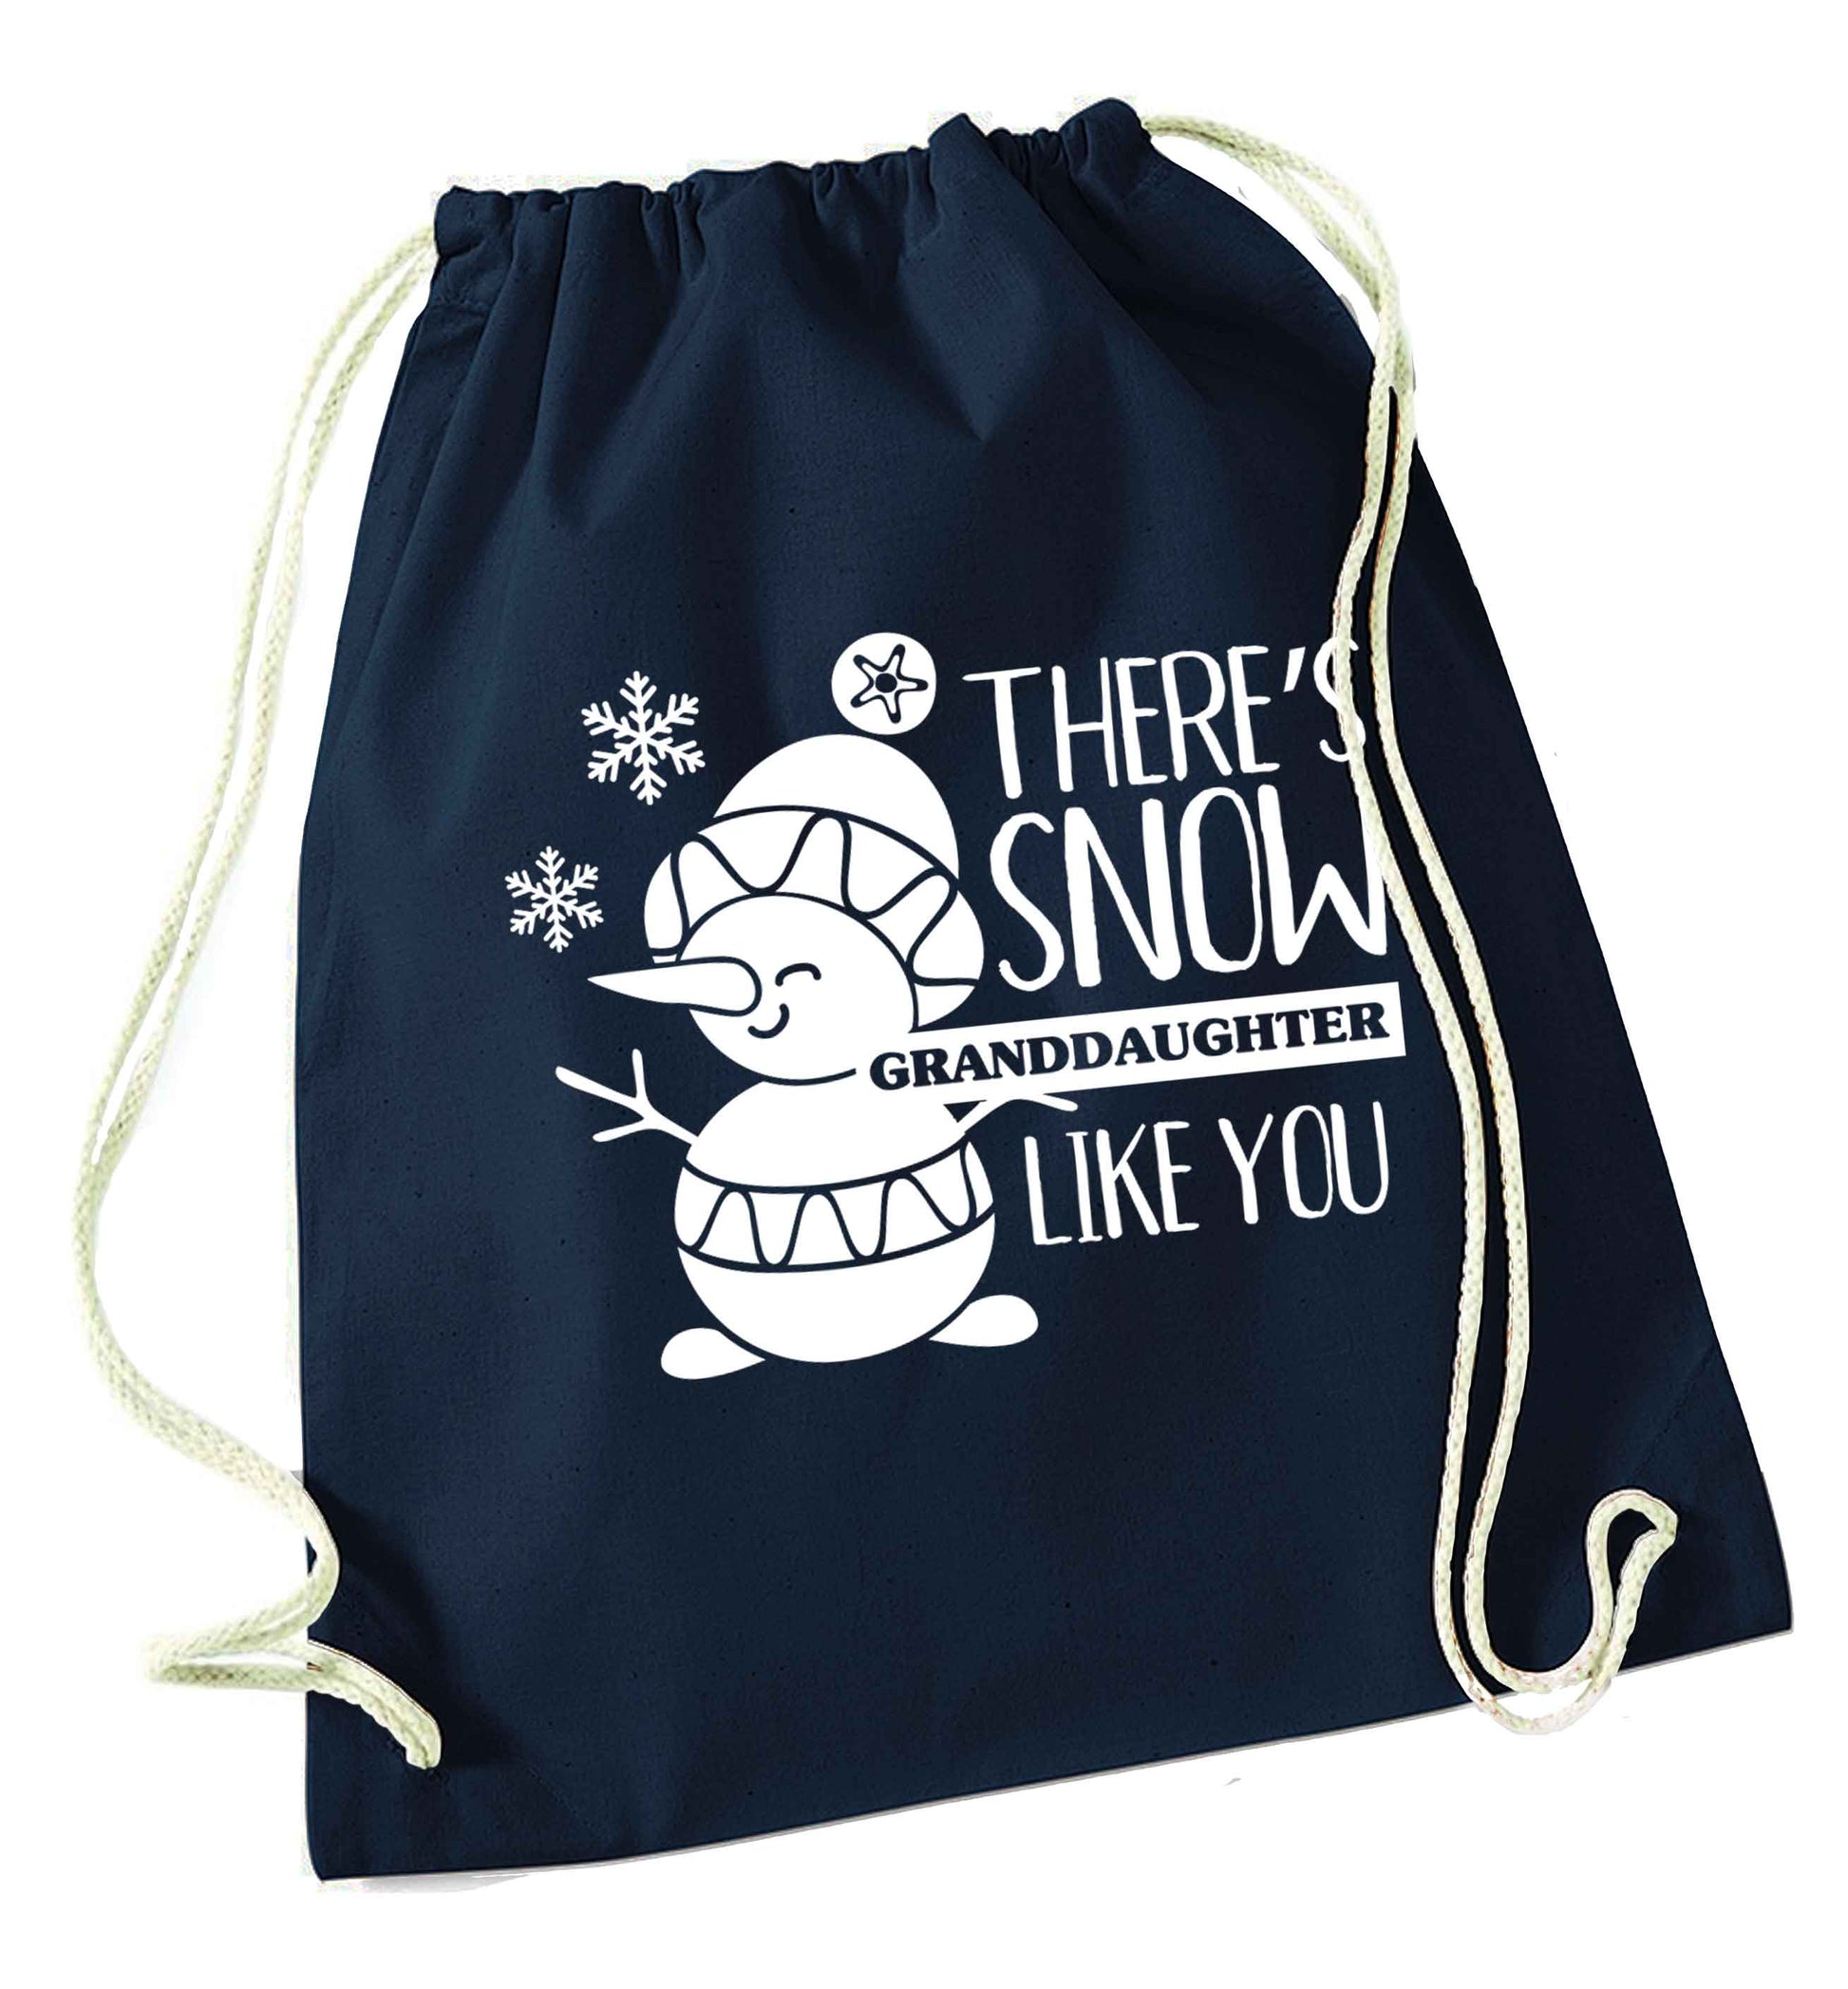 There's snow granddaughter like you navy drawstring bag